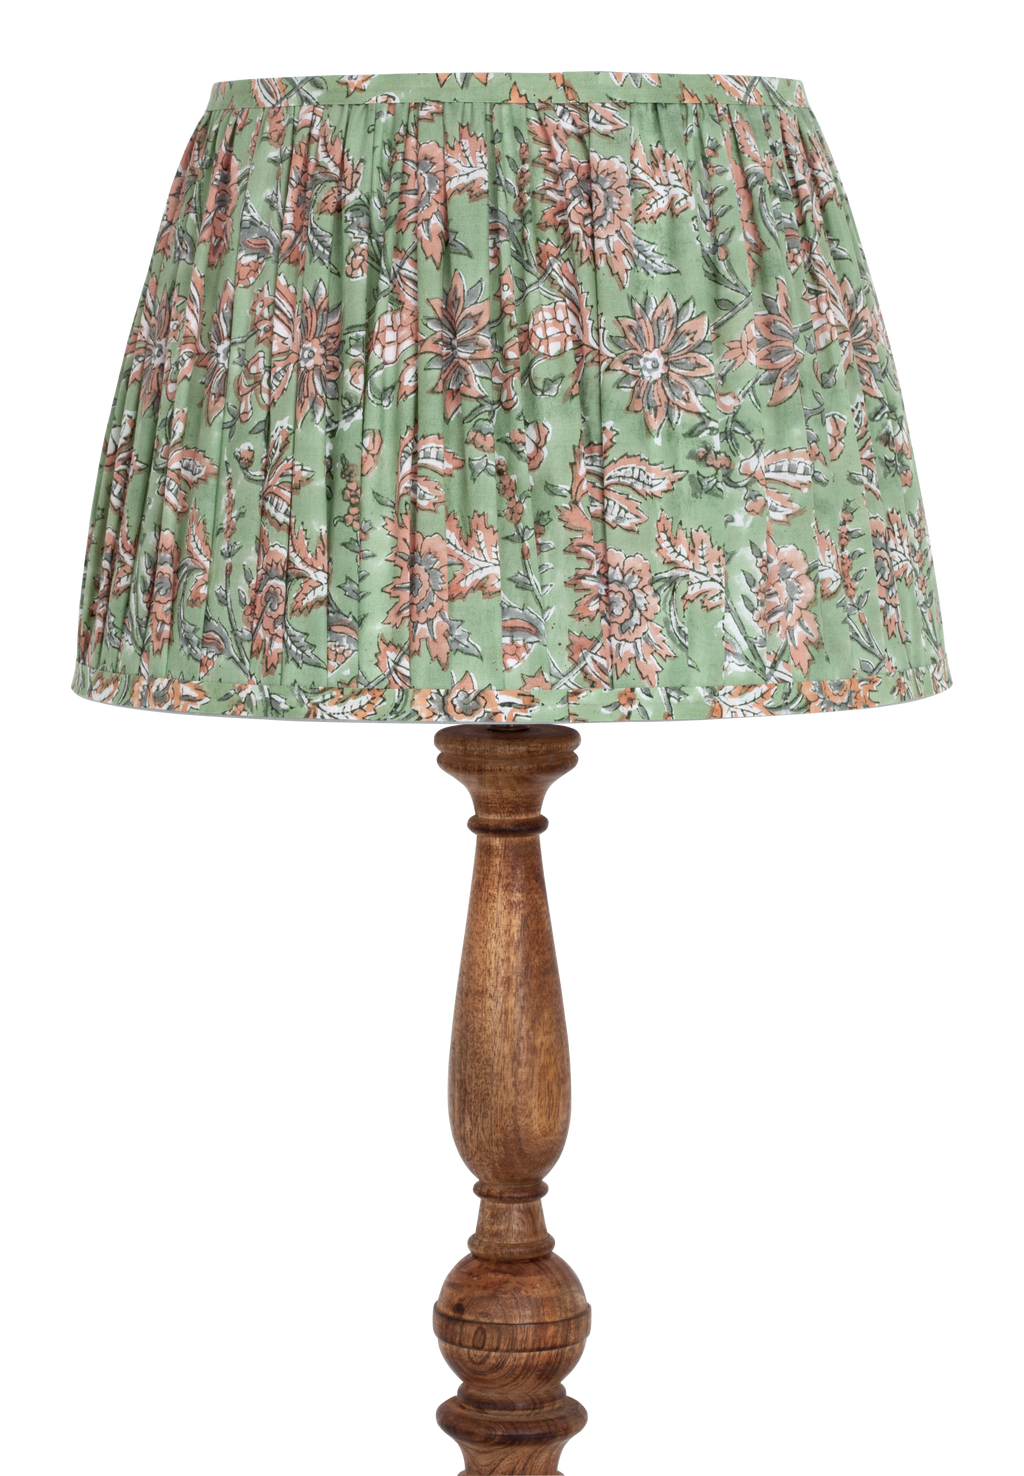 Lampshade with Indian Summer print in Green - Large